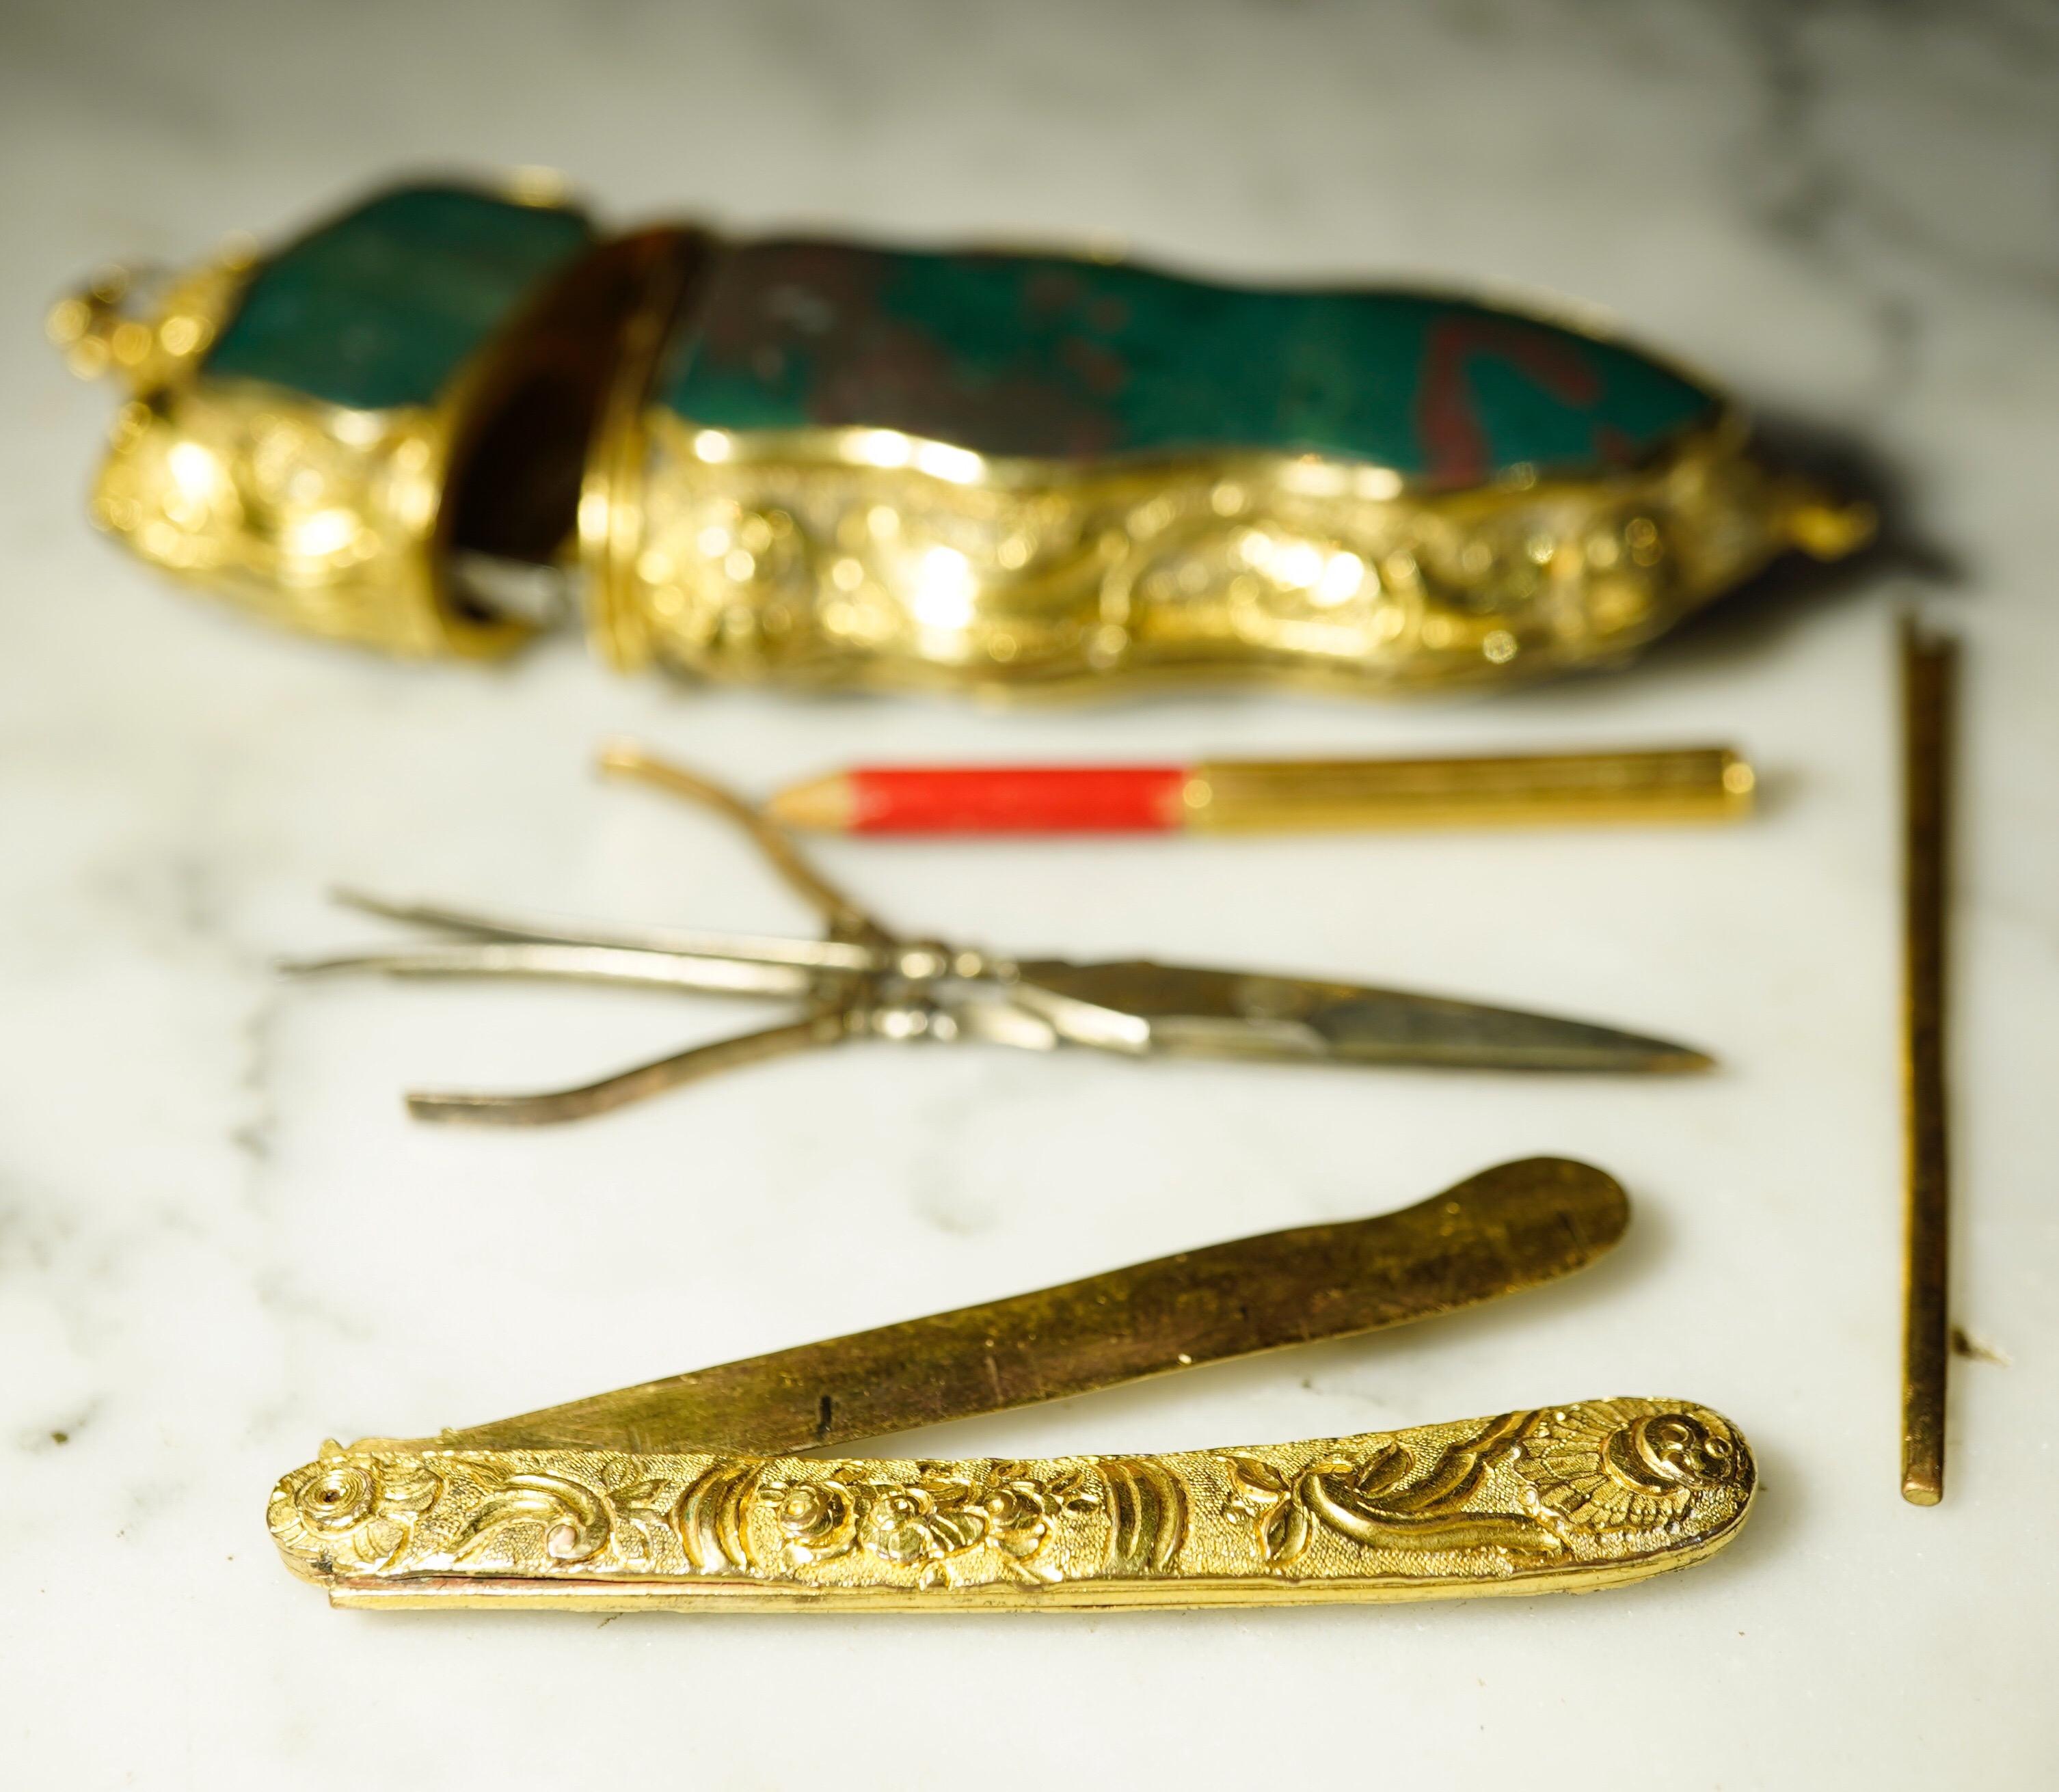 German Etui, Gilt Copper with Bloodstone Sides, Partial Contents, circa 1750 For Sale 2